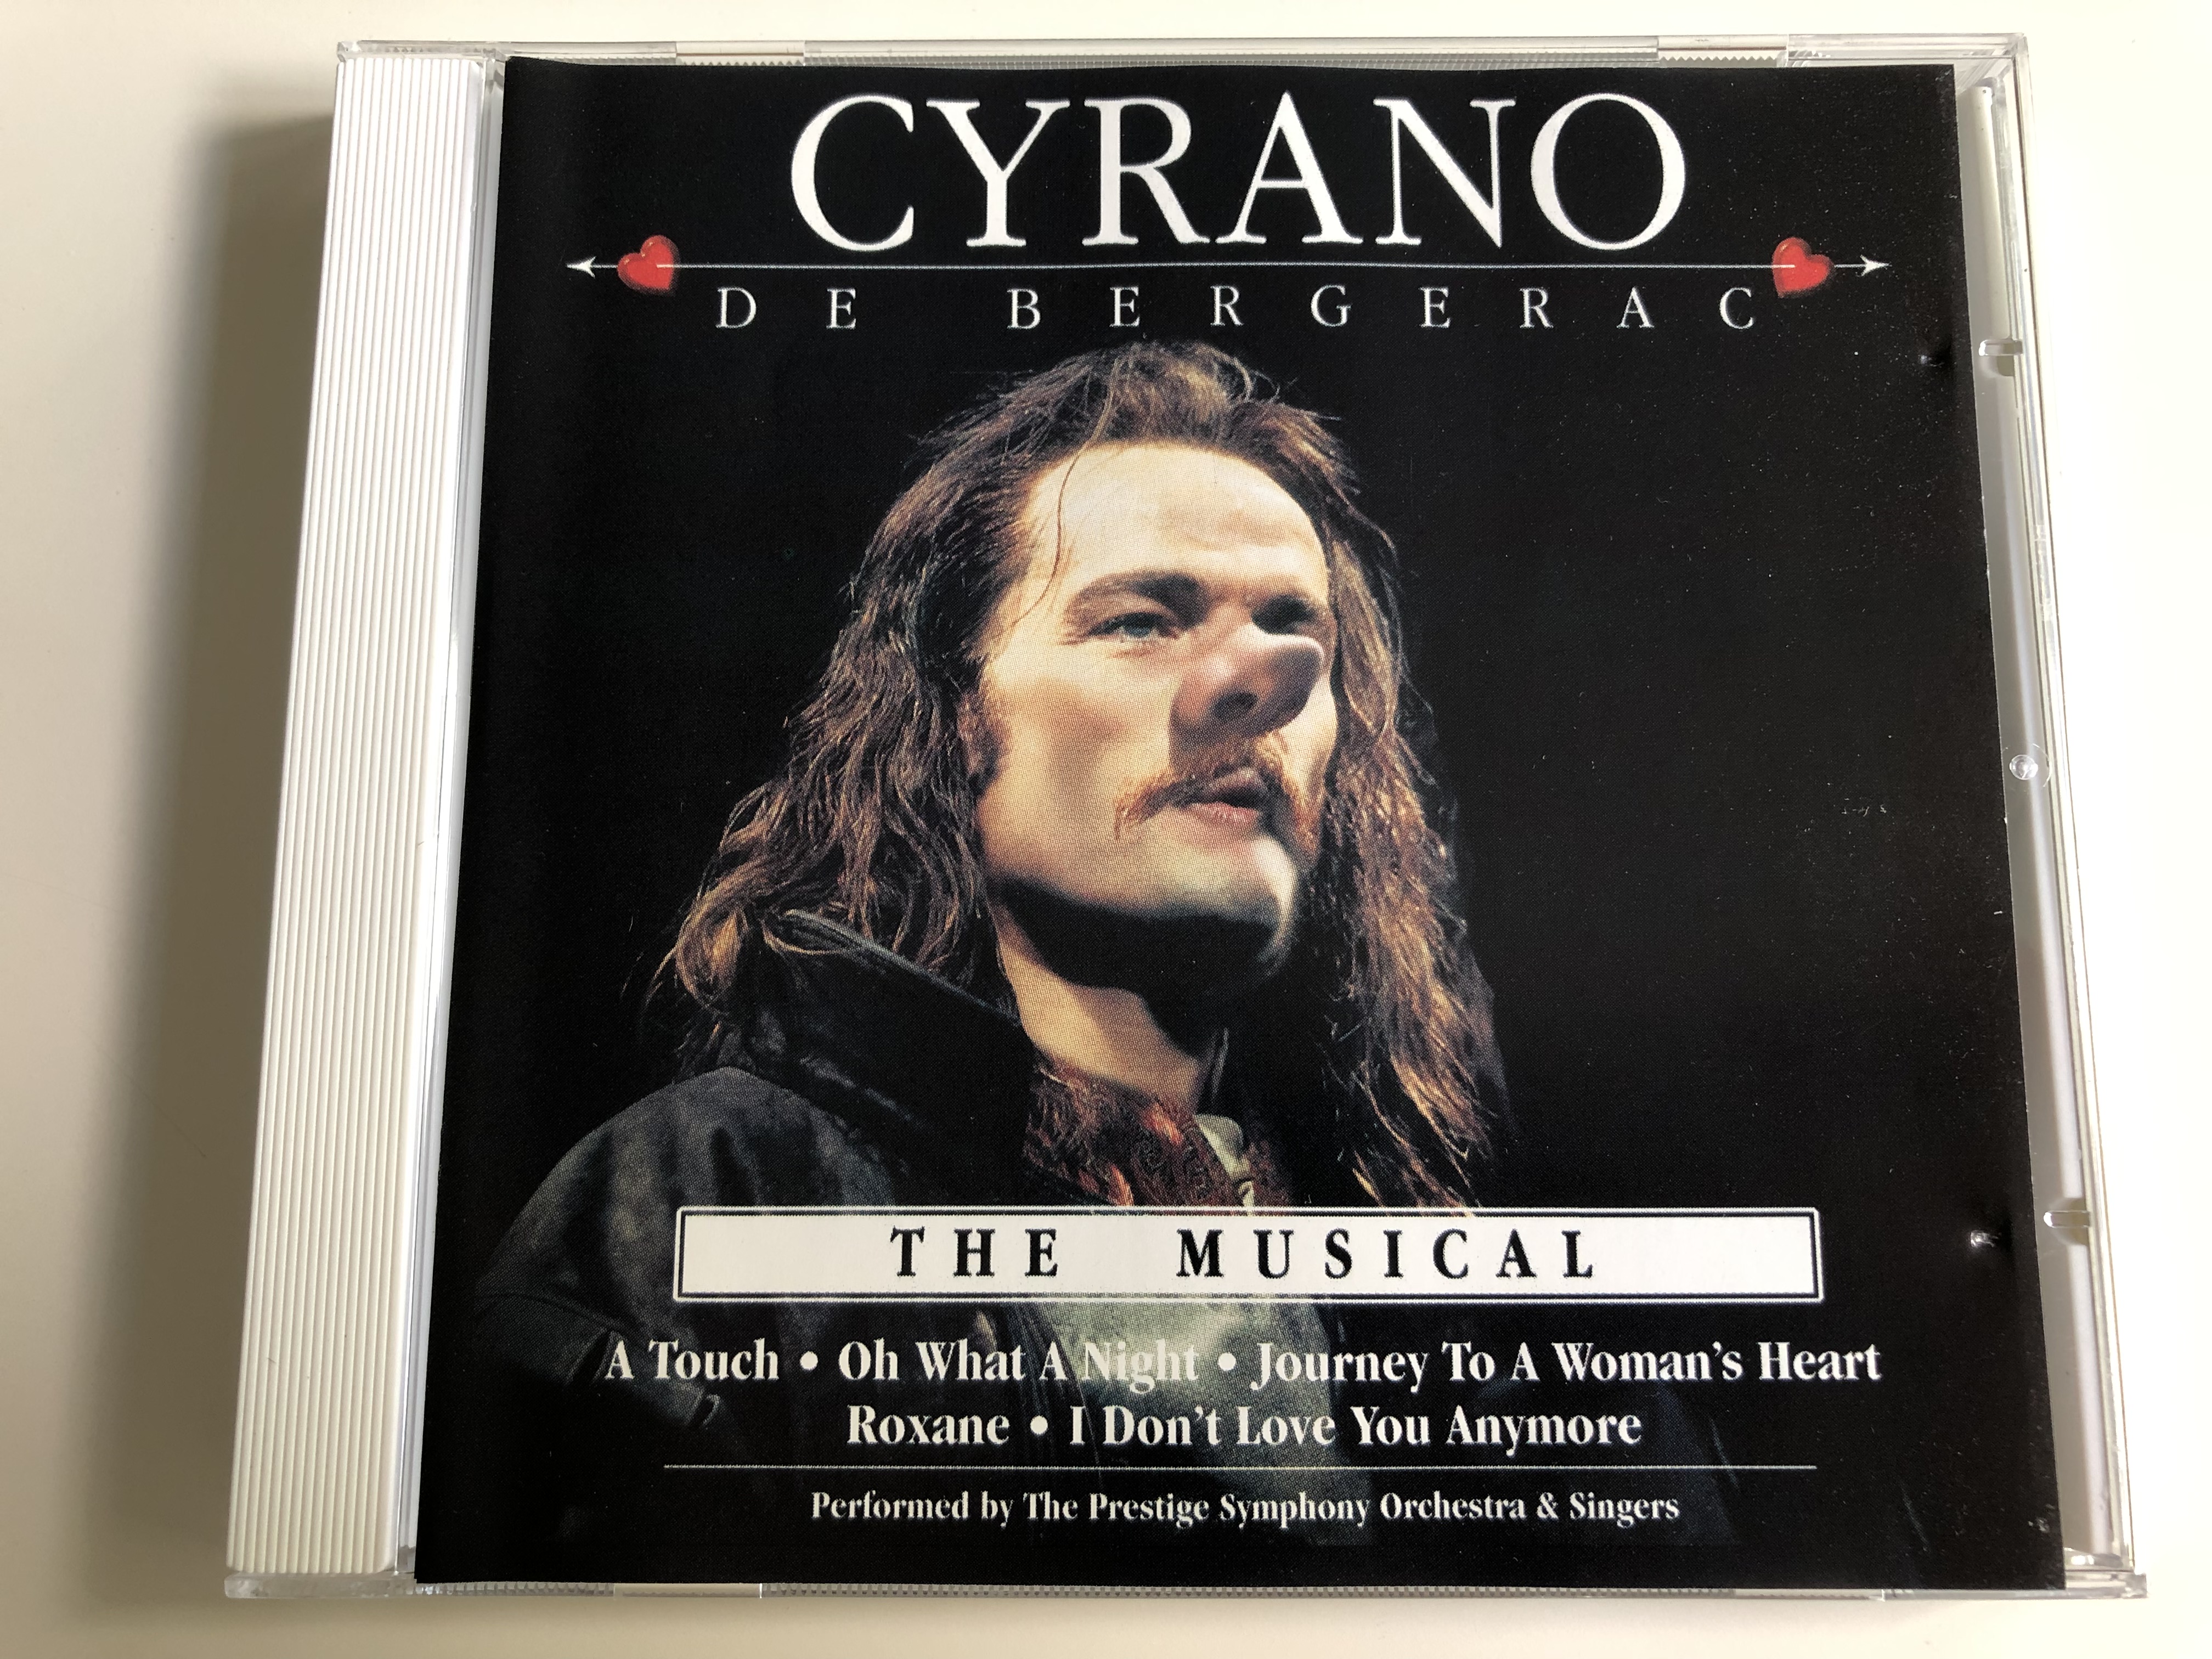 cyrano-de-bergerac-the-musical-a-touch-oh-what-a-night-journey-to-a-woman-s-heart-performed-by-the-prestige-symphony-orchestra-singers-audio-cd-2007-fg468-1-.jpg